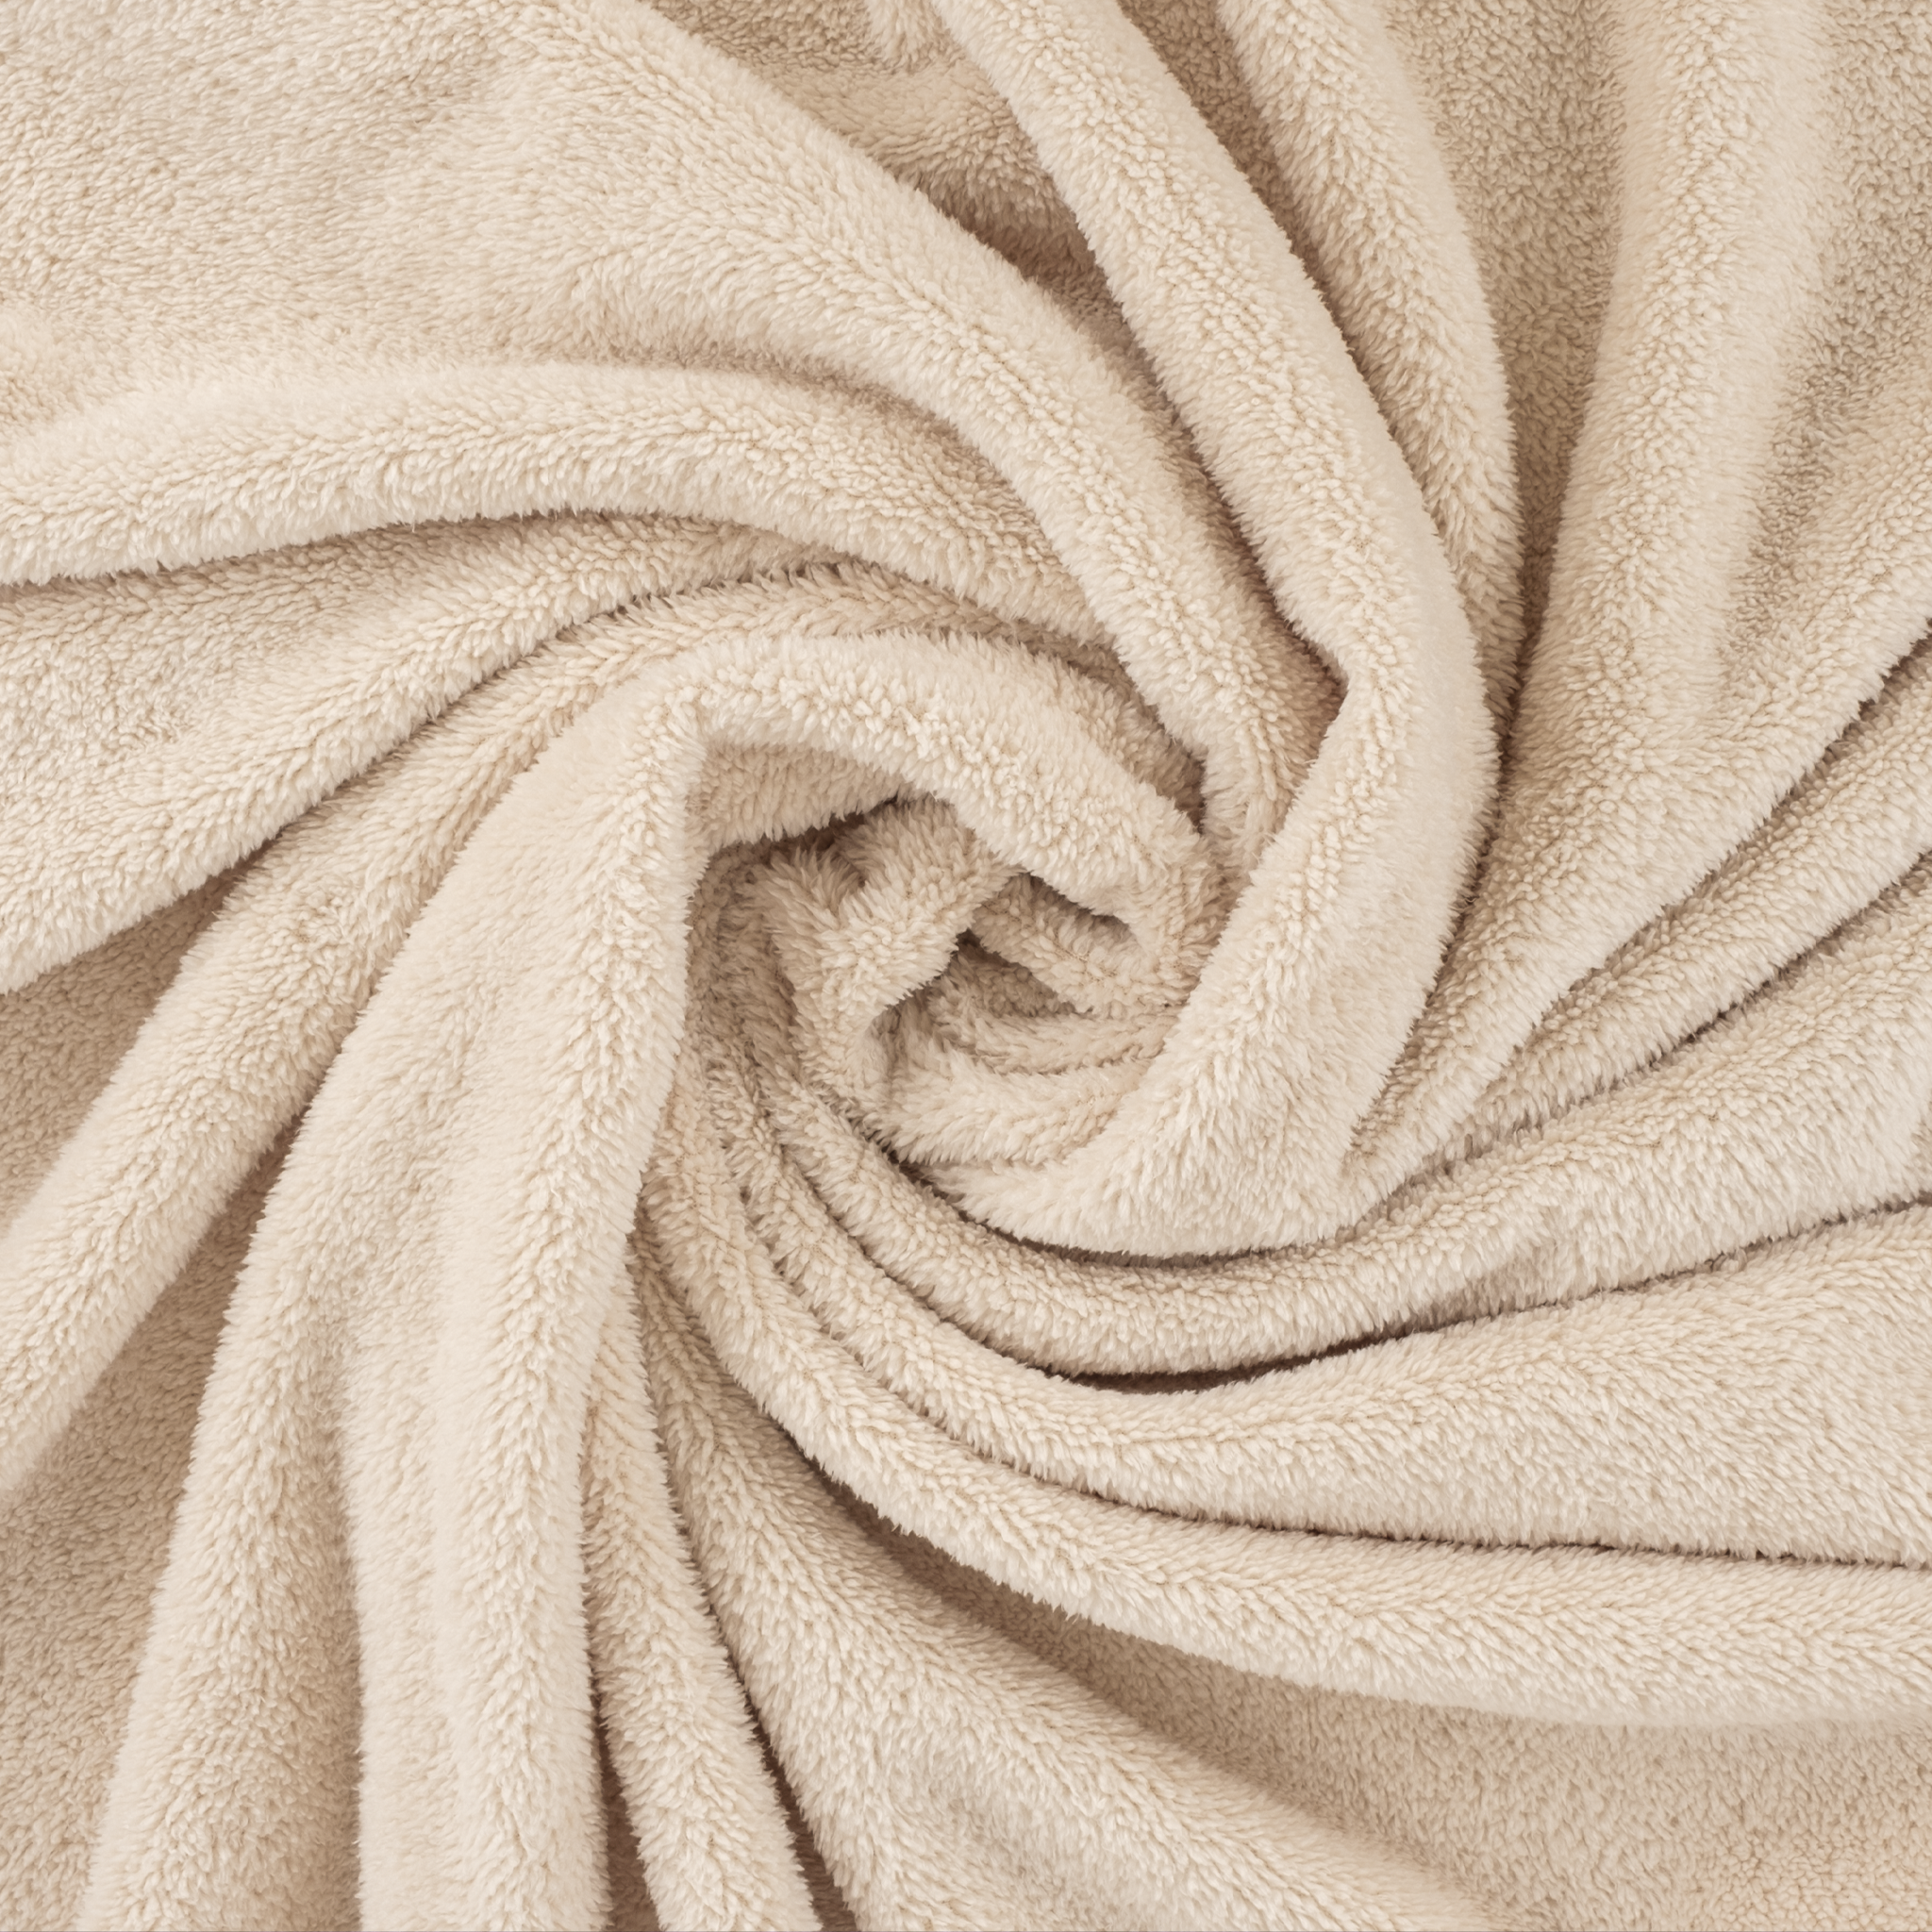 American Soft Linen - Bedding Fleece Blanket - Throw Size 50x60 inches - Sand-Taupe - 5